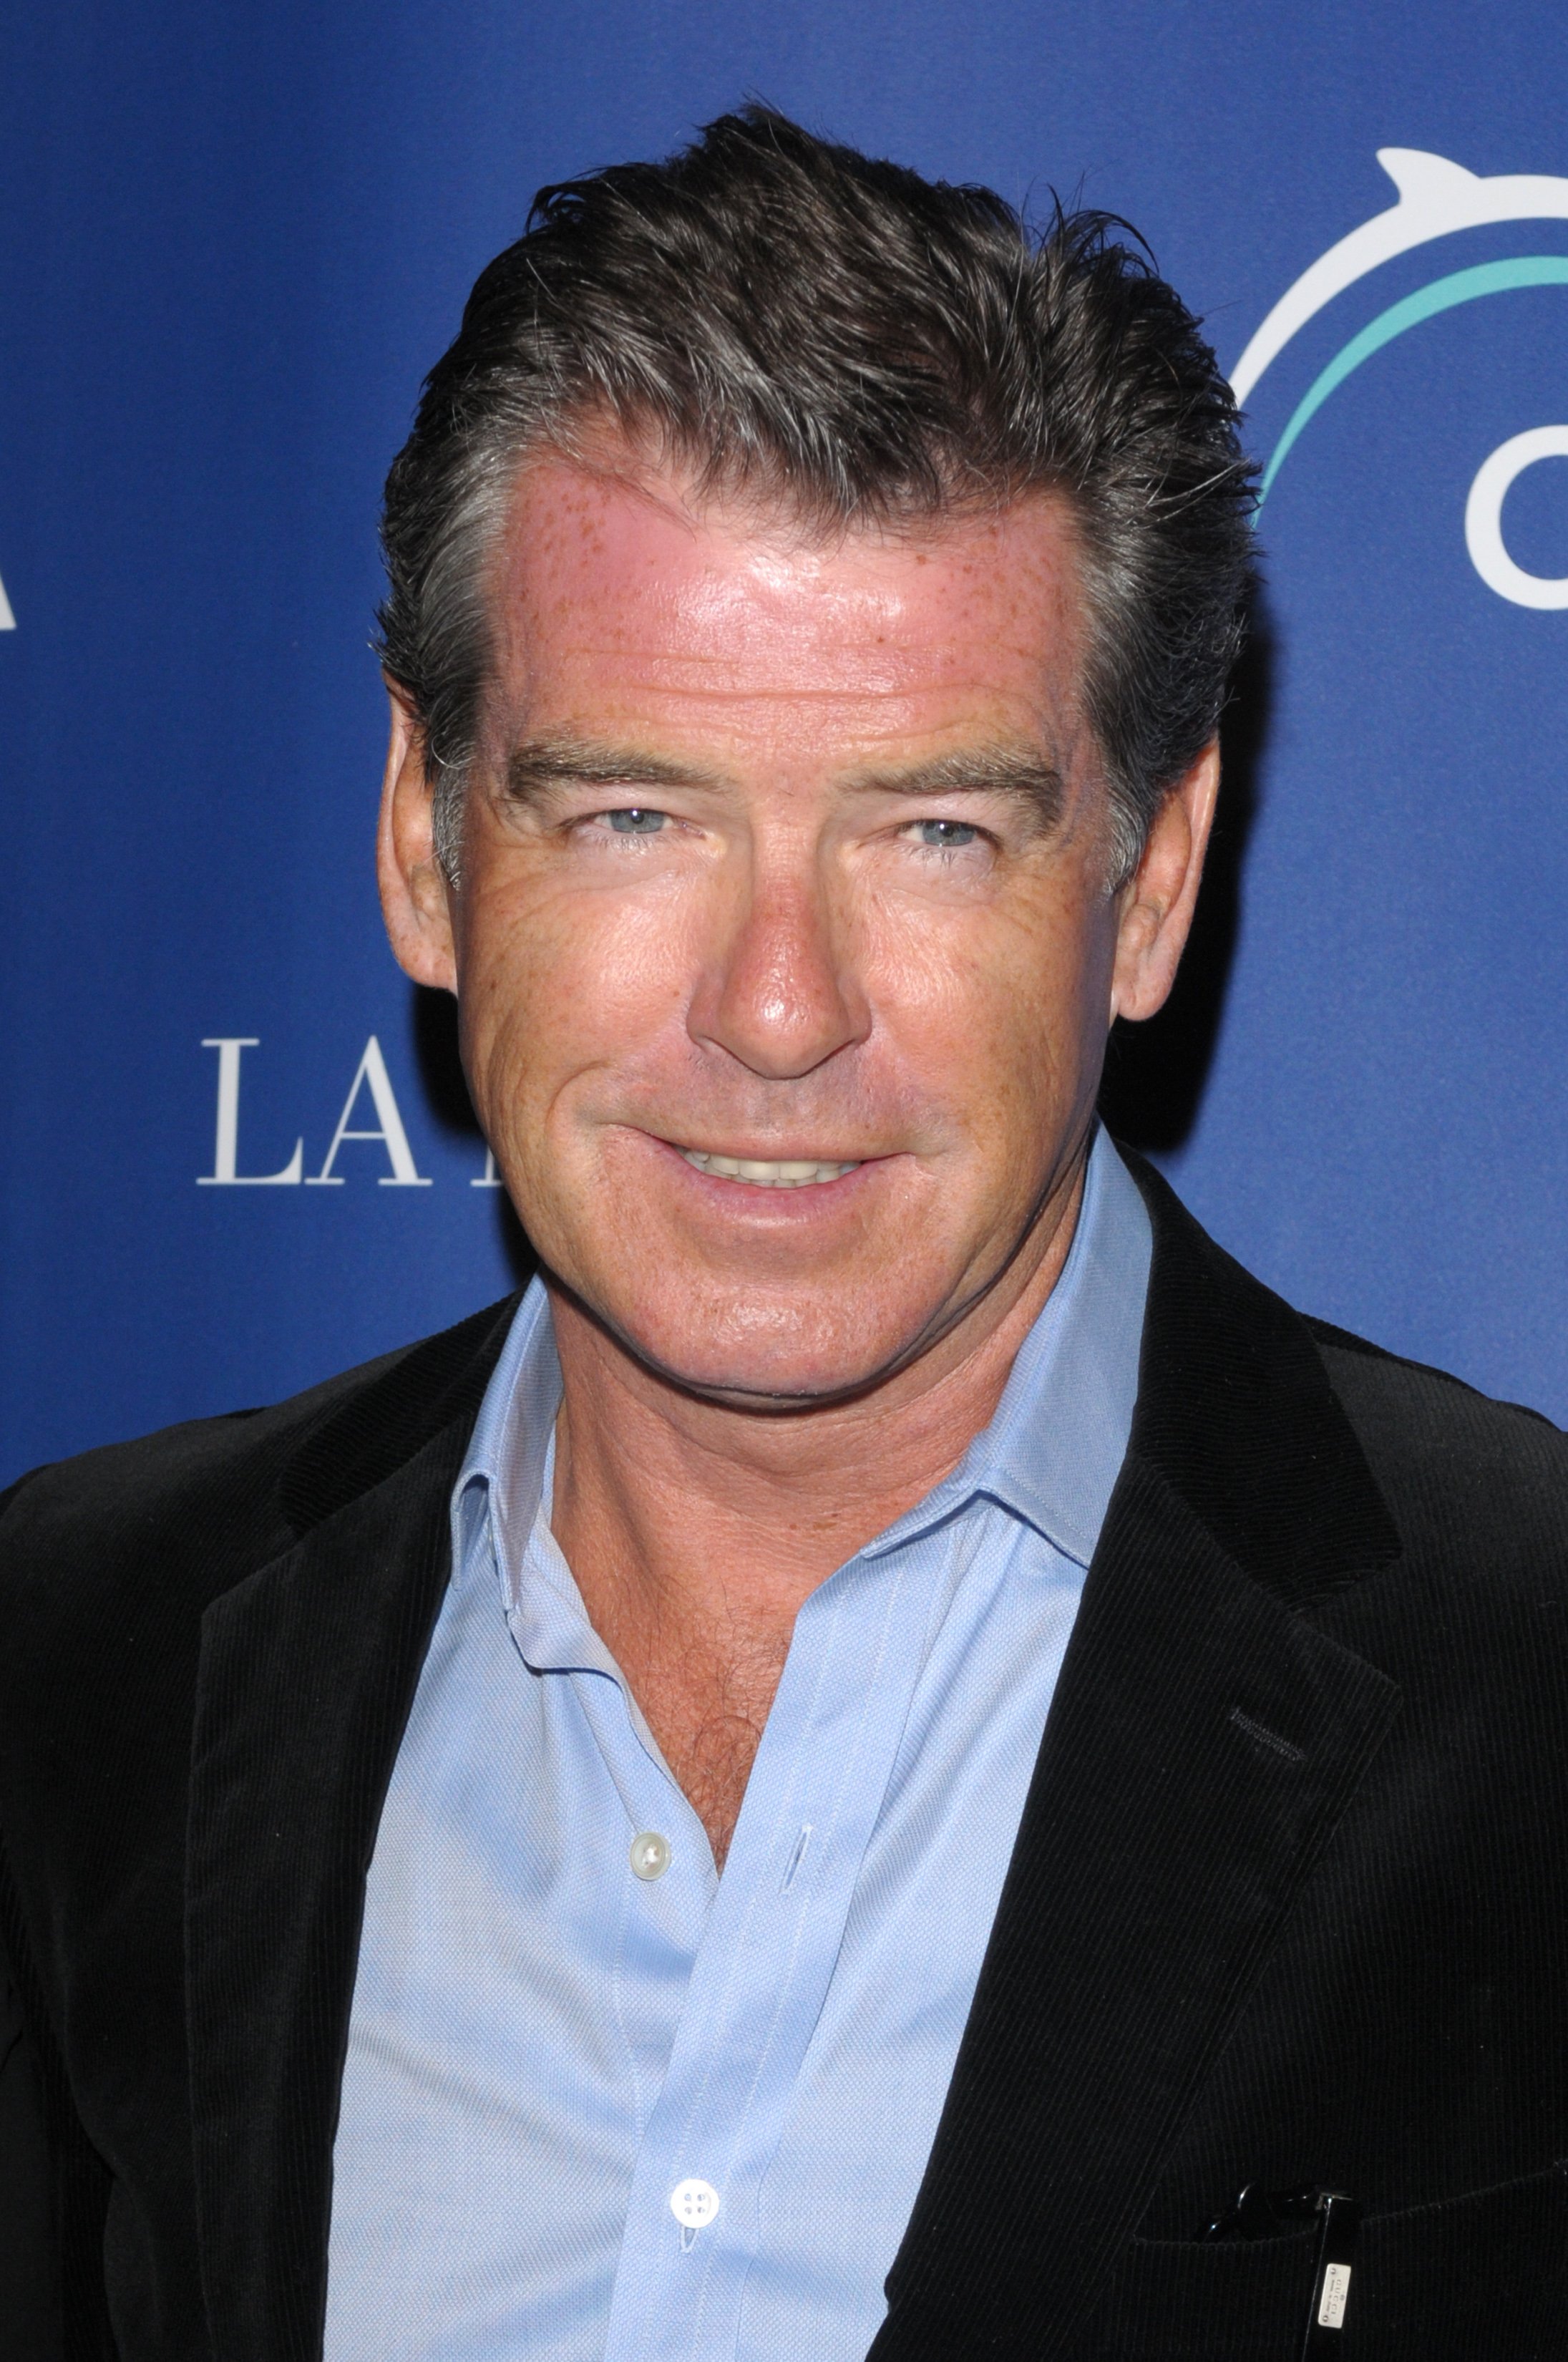 Pierce Brosnan kommt zur Oceana Annual Partners Awards Gala in Pacific Palisades. | Quelle: Getty Images